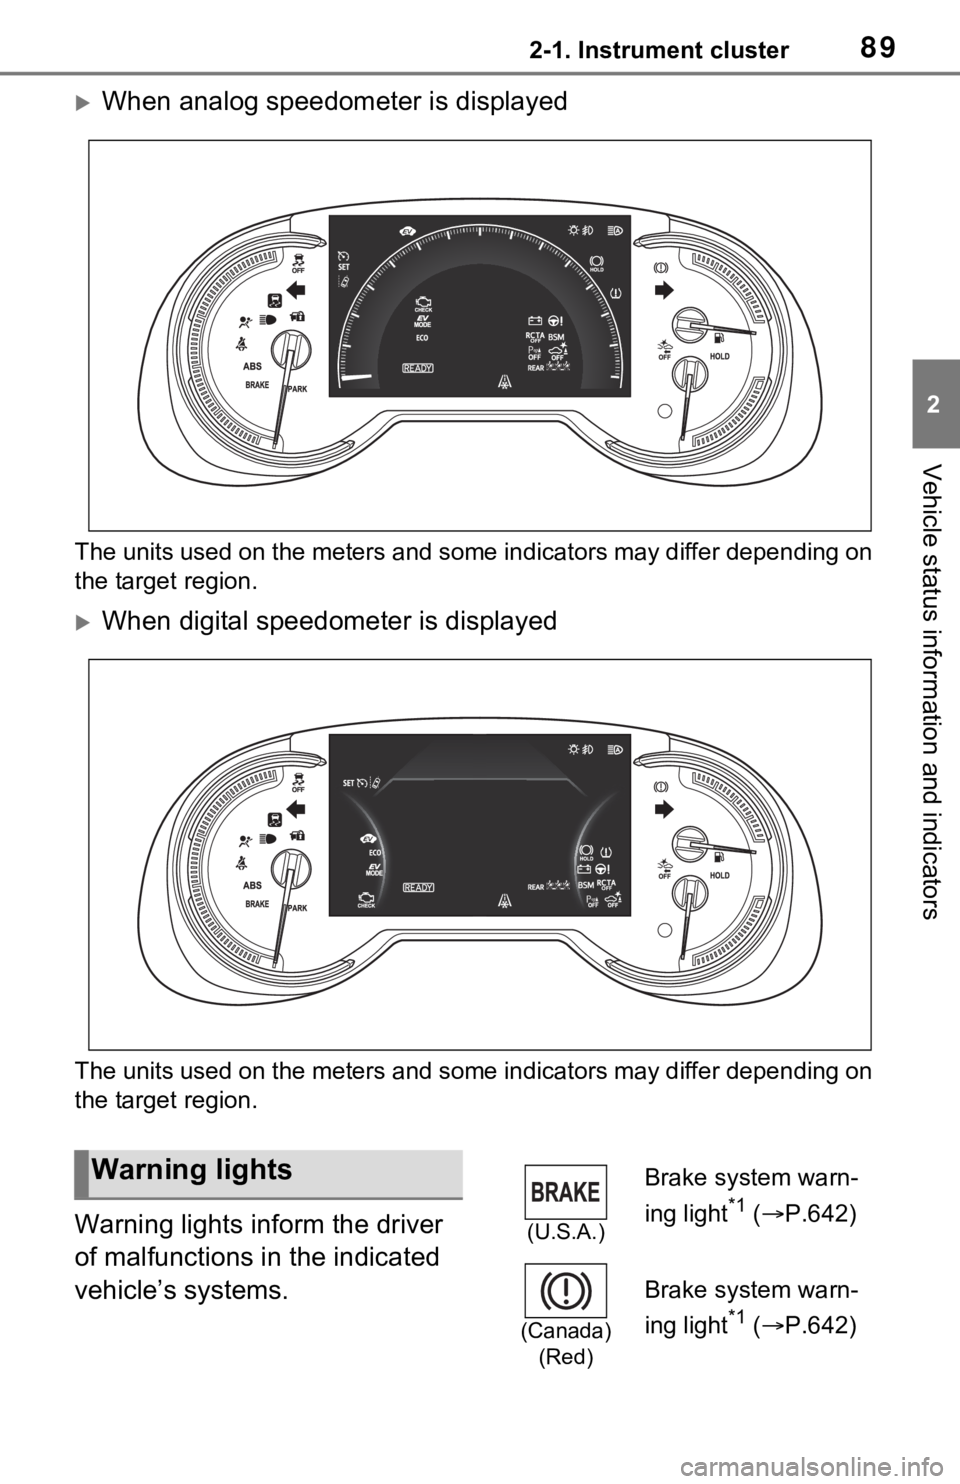 TOYOTA RAV4 HYBRID 2021  Owners Manual (in English) 892-1. Instrument cluster
2
Vehicle status information and indicators
When analog speedometer is displayed
The units used on the meters and some indicators may differ dep ending on 
the target regi